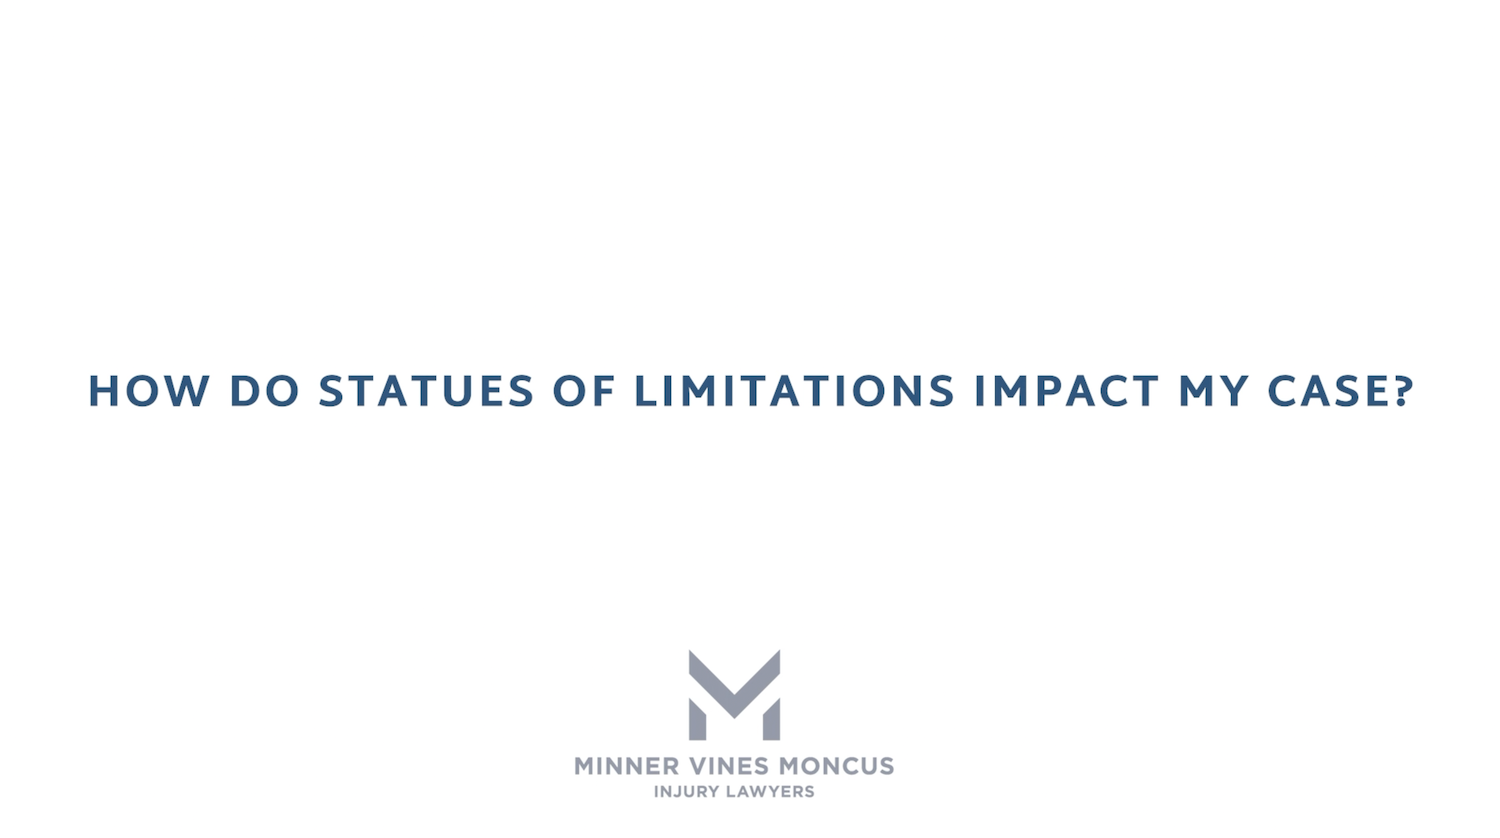 How do statutes of limitations impact my case?